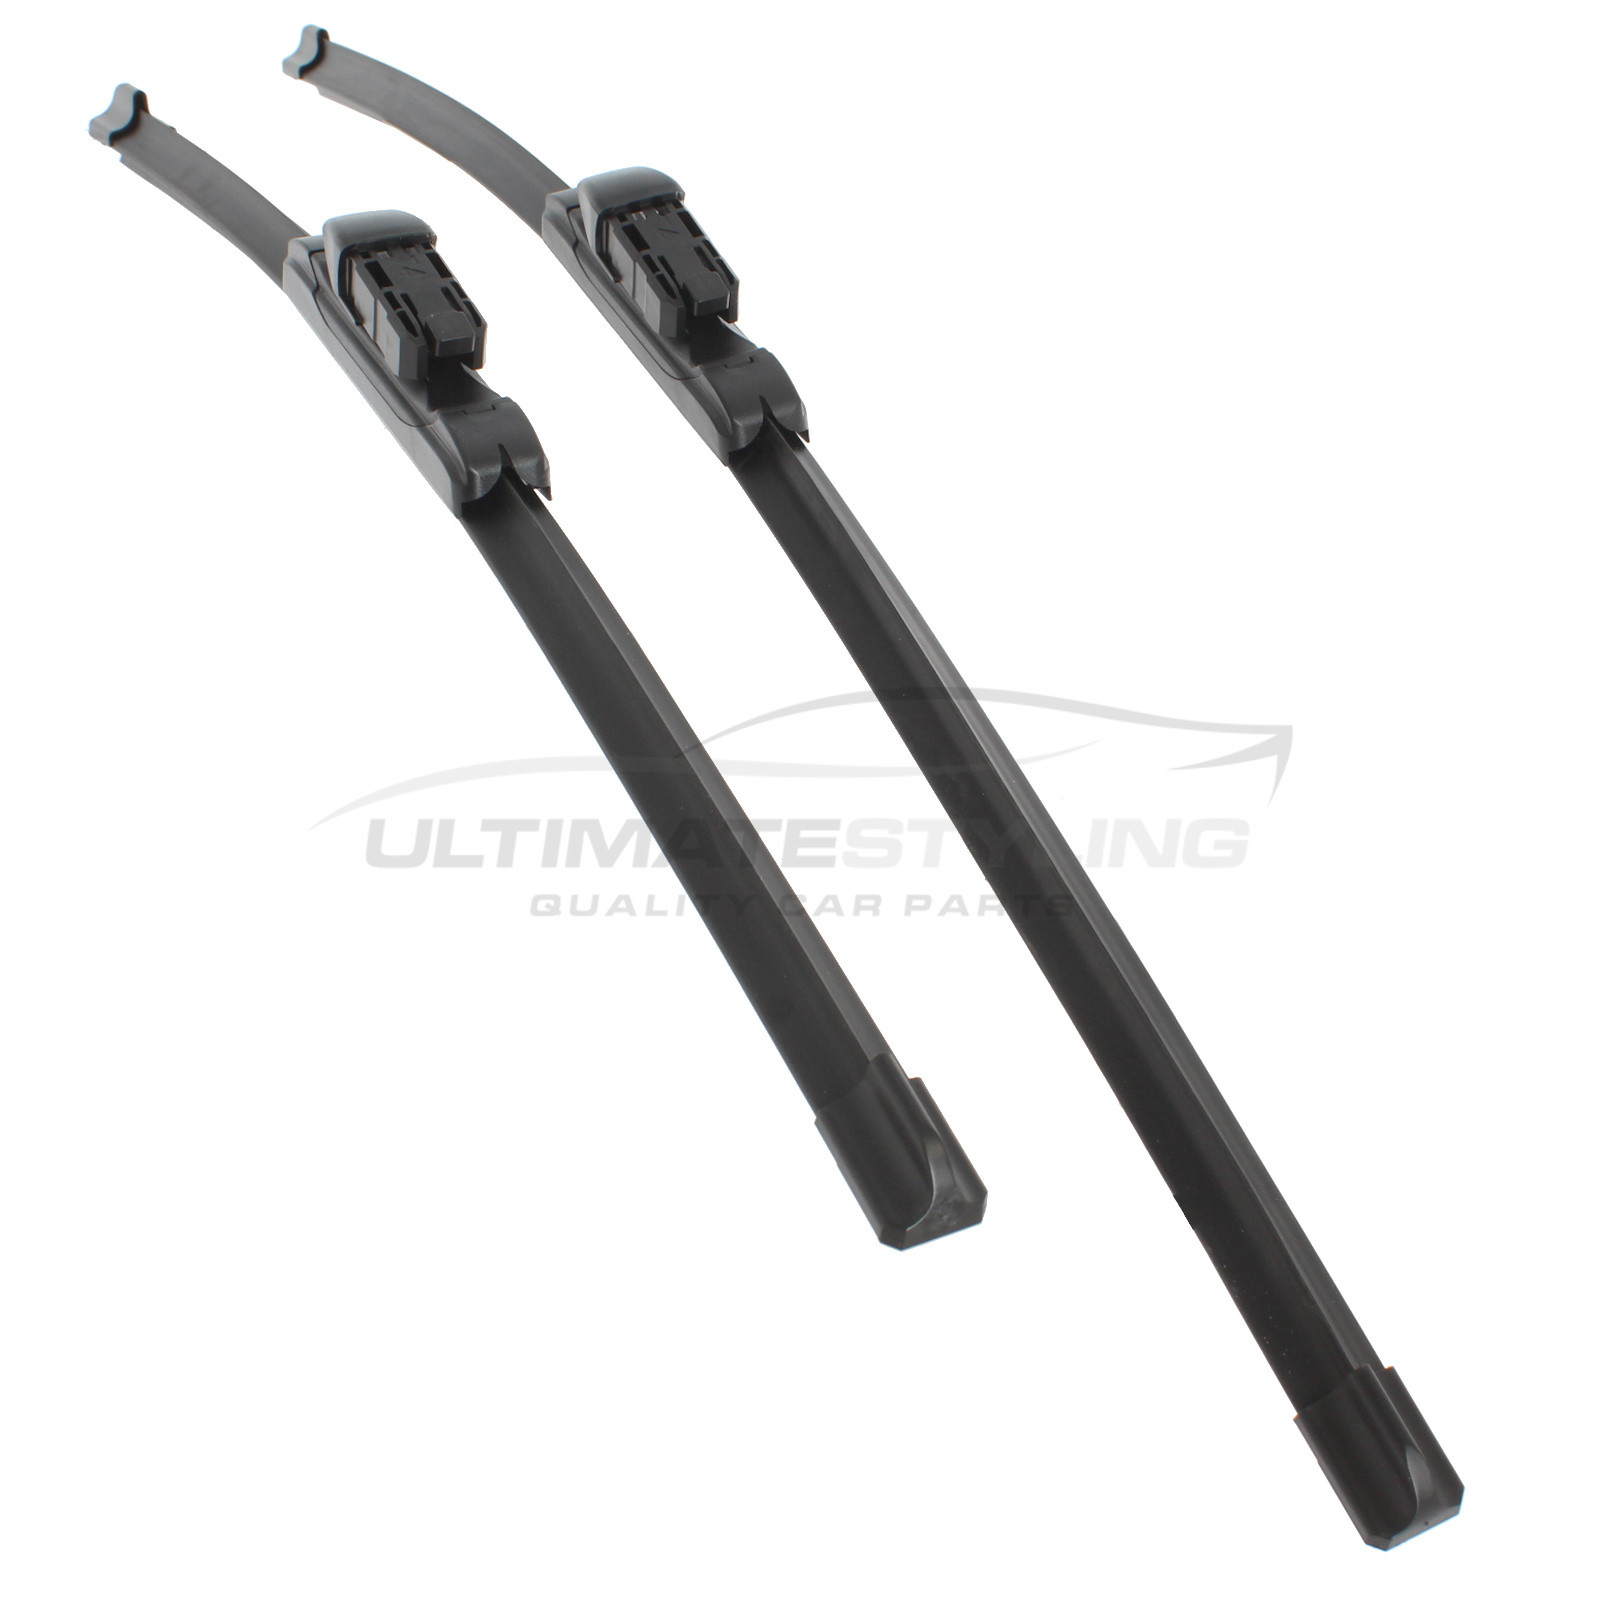 Drivers Side & Passenger Side (Front) Wiper Blades for VW Touran